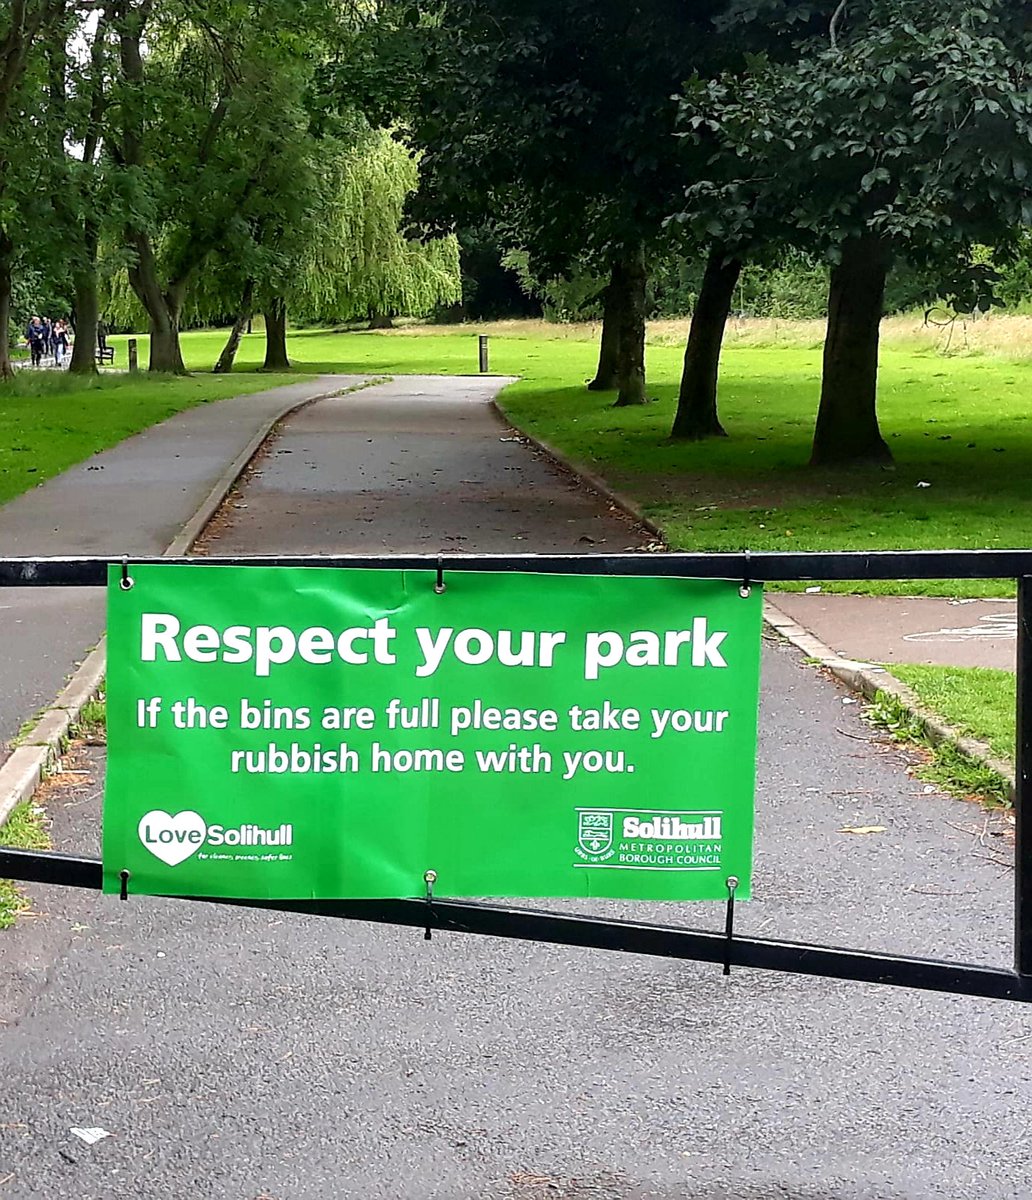 Family from another part of the country were gobsmacked at the littering, bad driving / parking in #Birmingham & #Solihull on the weekend. At Malvern Park we saw people throwing rubbish onto the grass. Thank you to the people who helped me to #callitout & get them to pick it up.